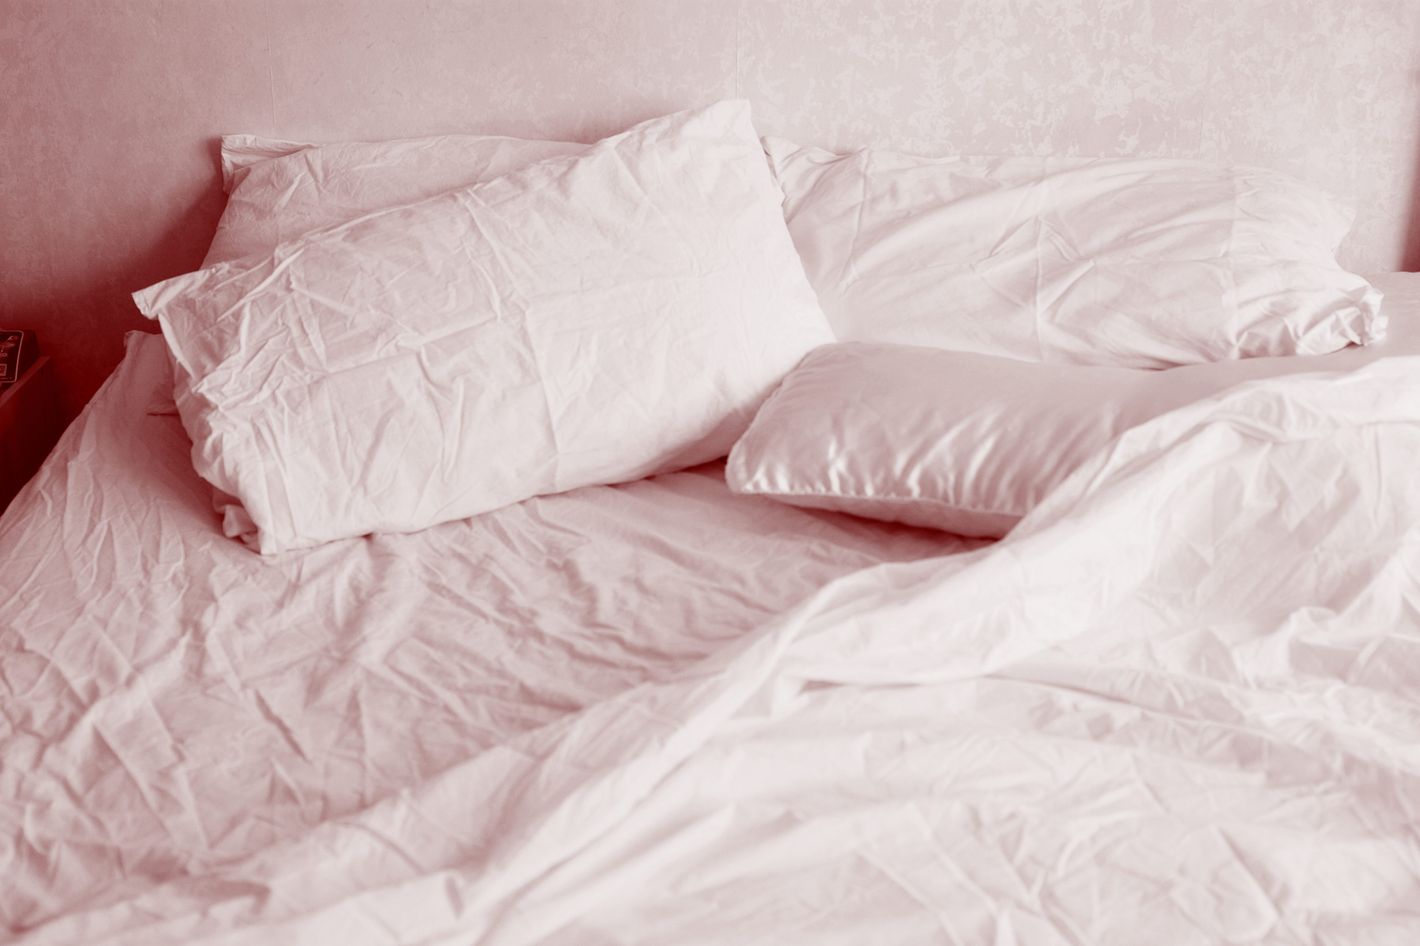 Bef Move - How to Be Better in Bed â€” 5 Science-Backed Tips -- Science of Us